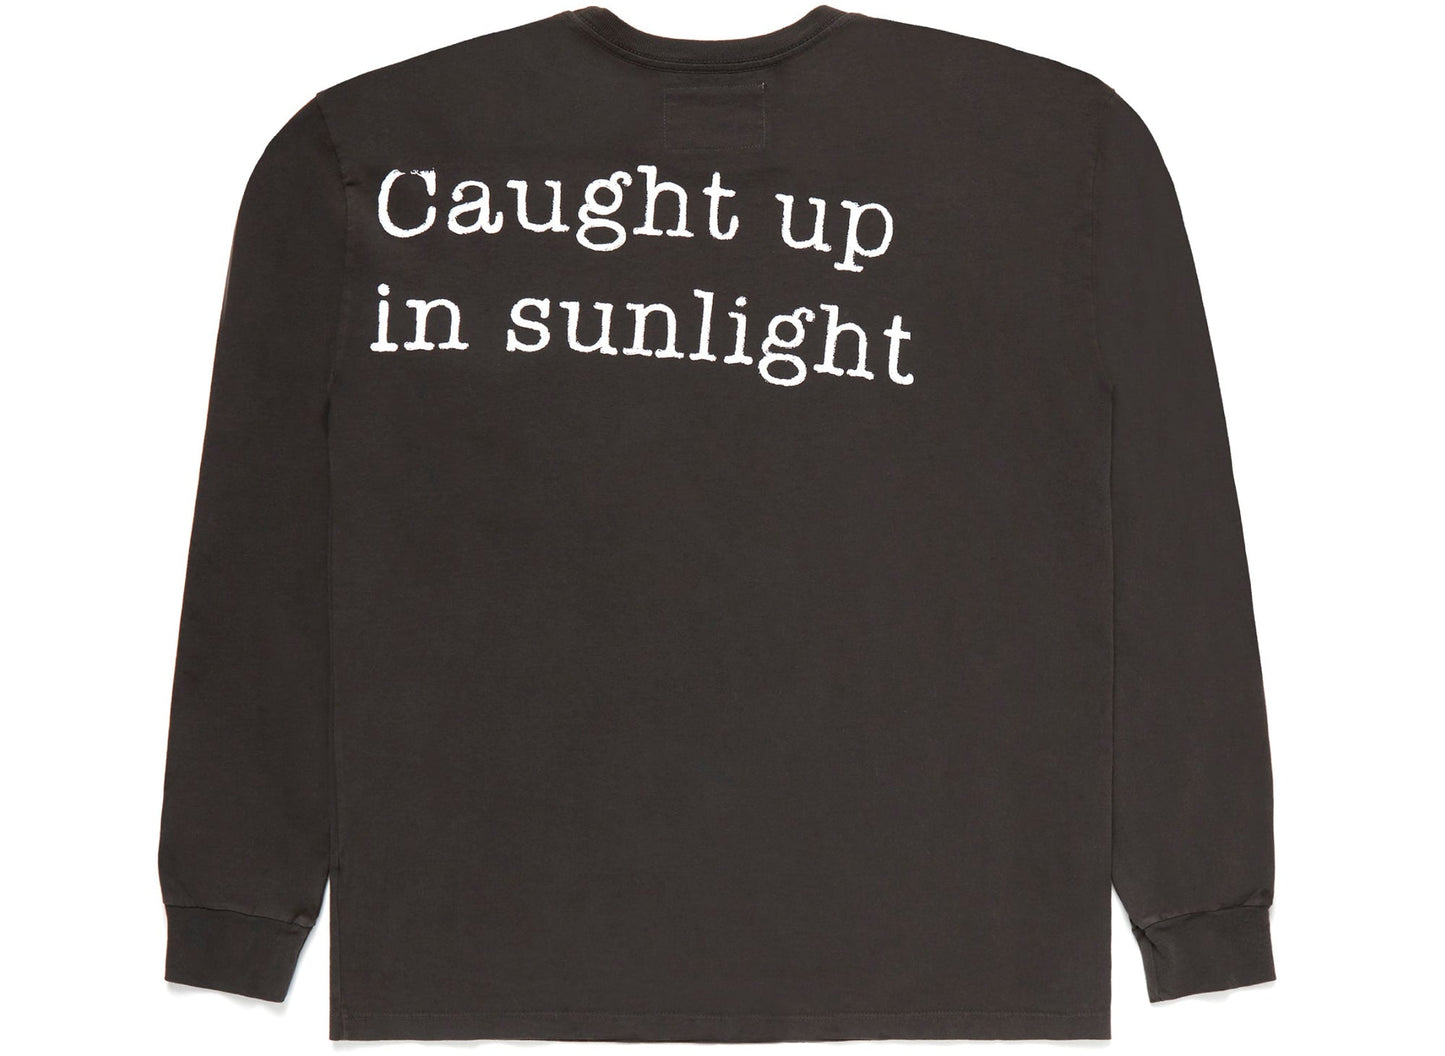 One of These Days Caught Up in the Sunlight L/S T-Shirt in Black